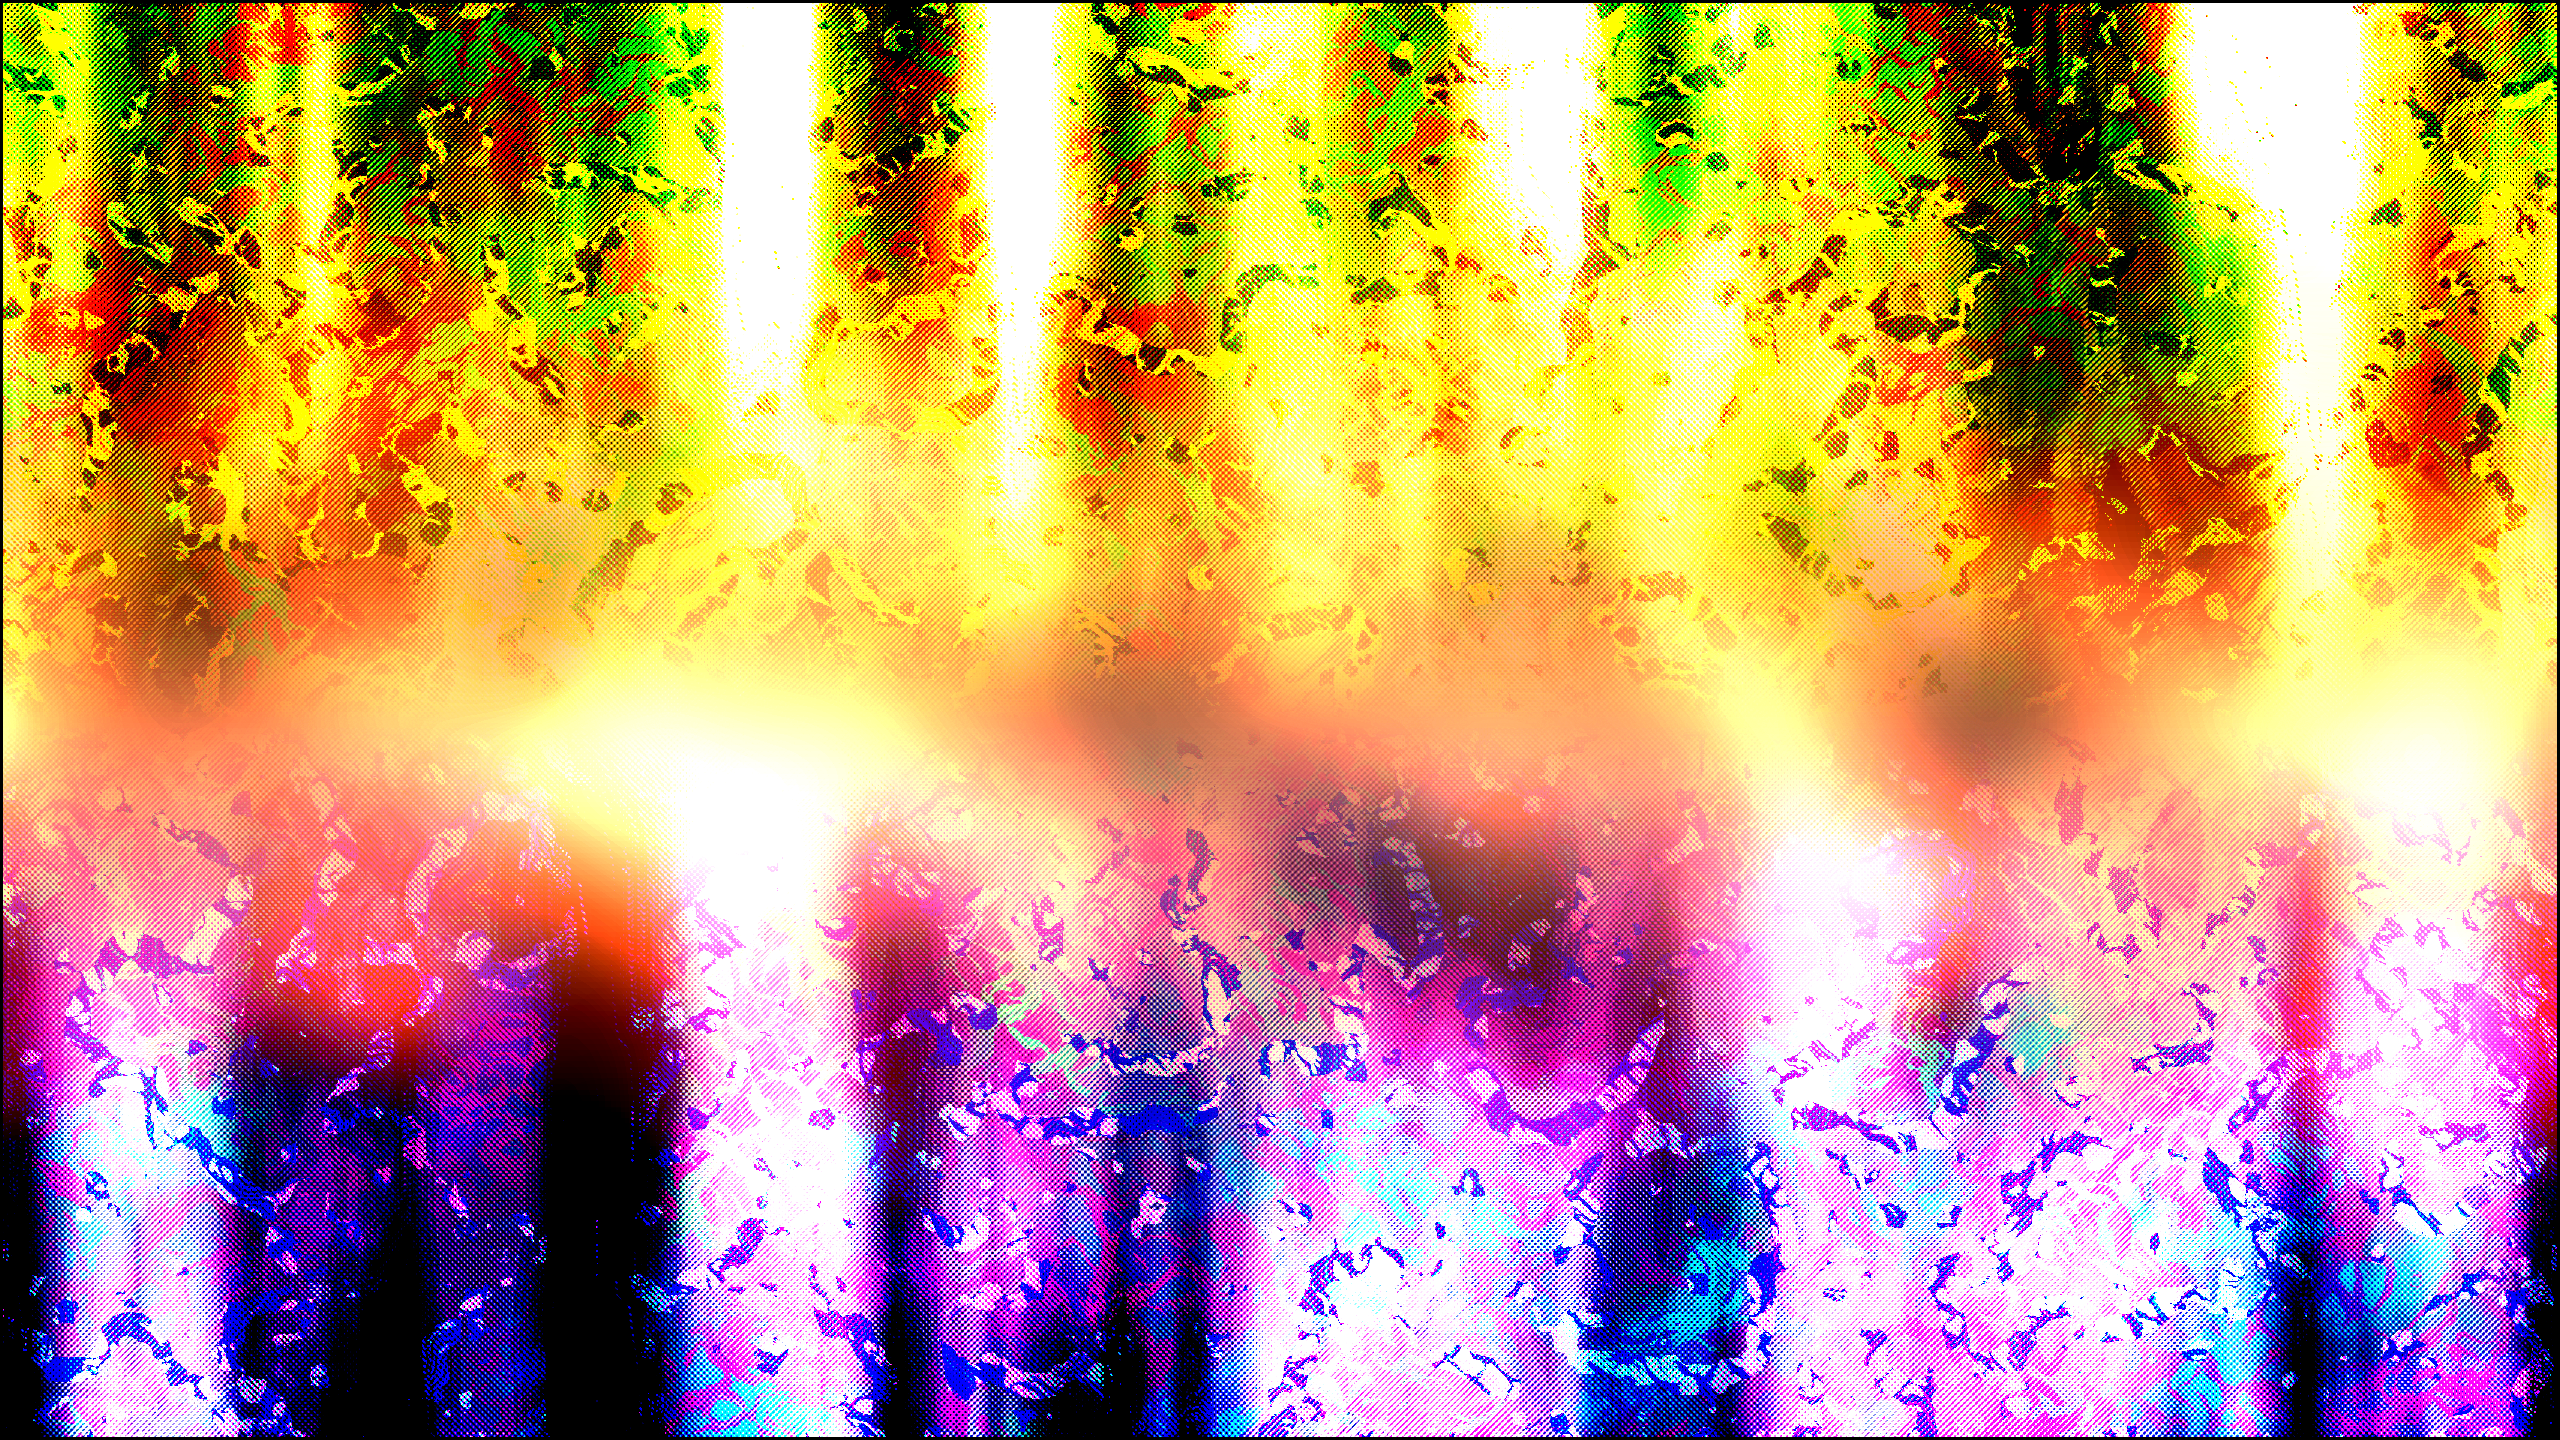 Trippy Psychedelic Abstract Digital Art Brightness 2560x1440